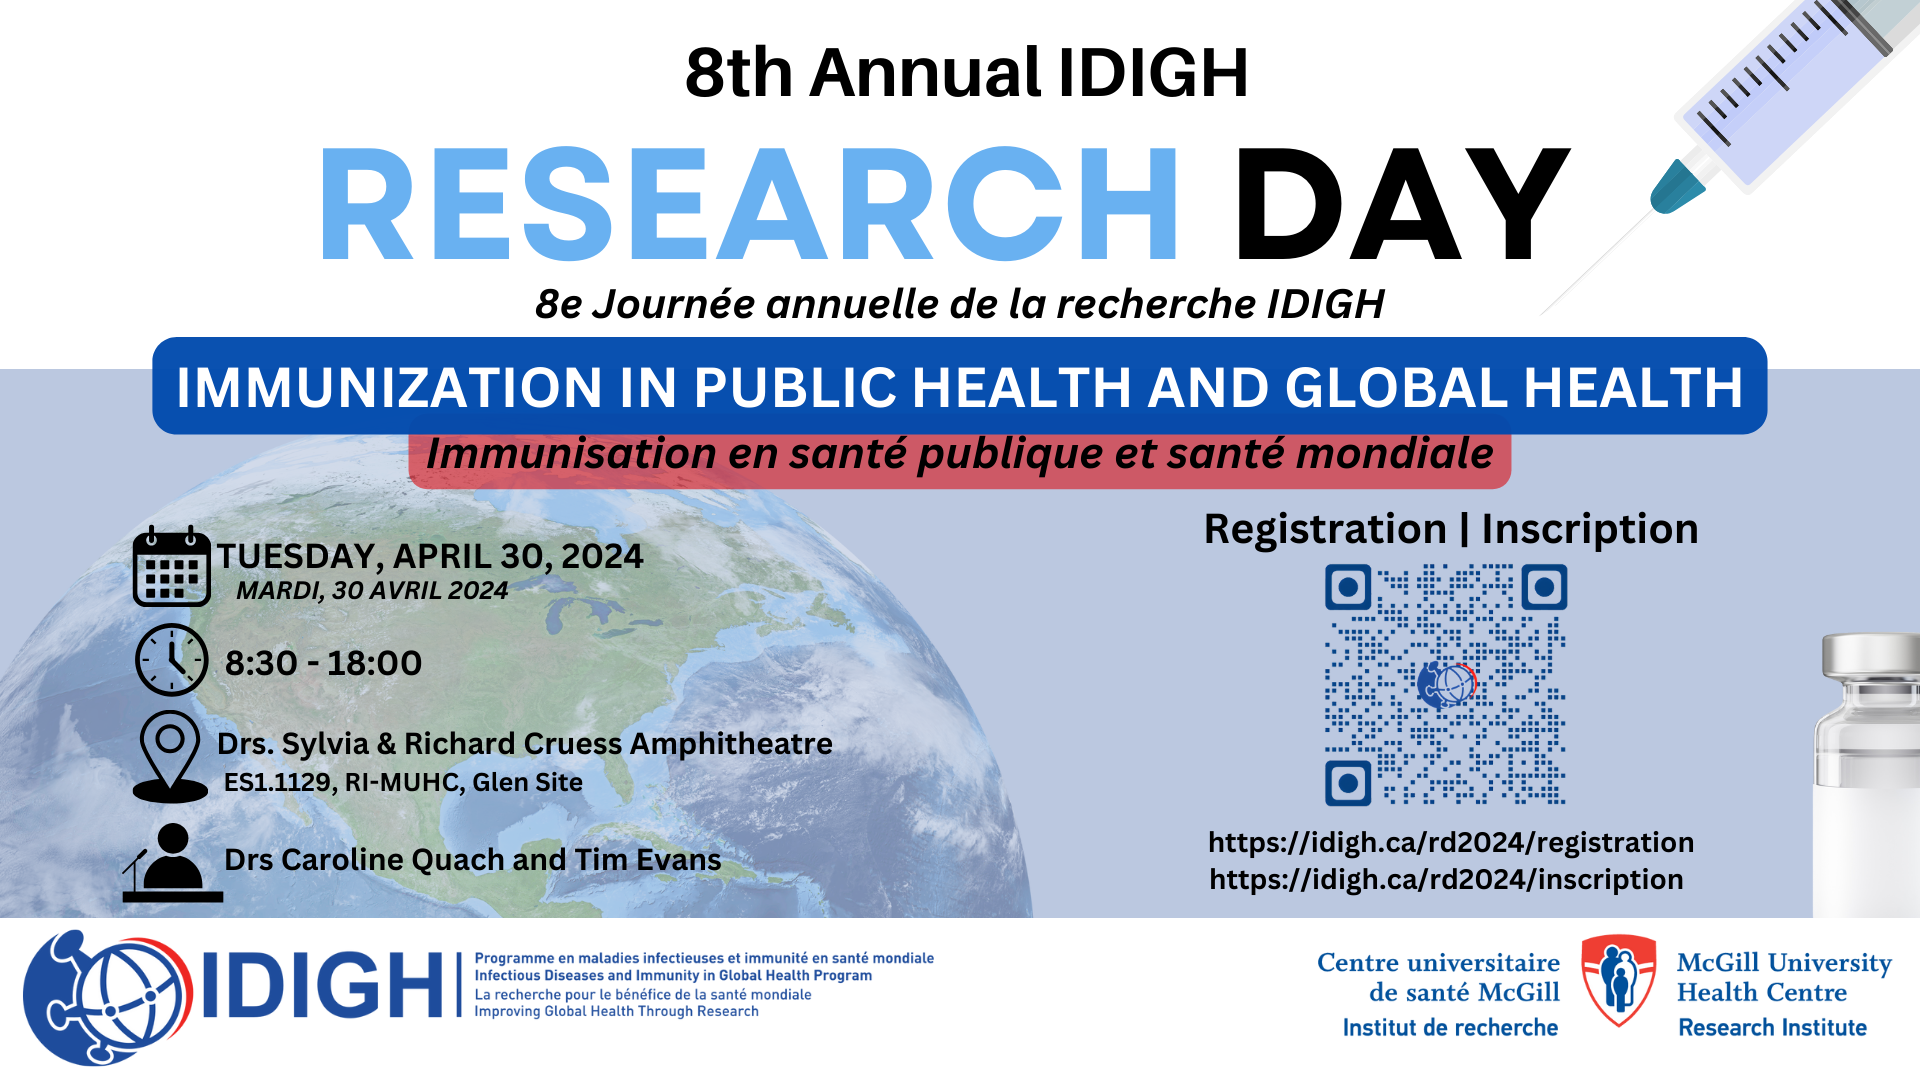 Research Day 2024 